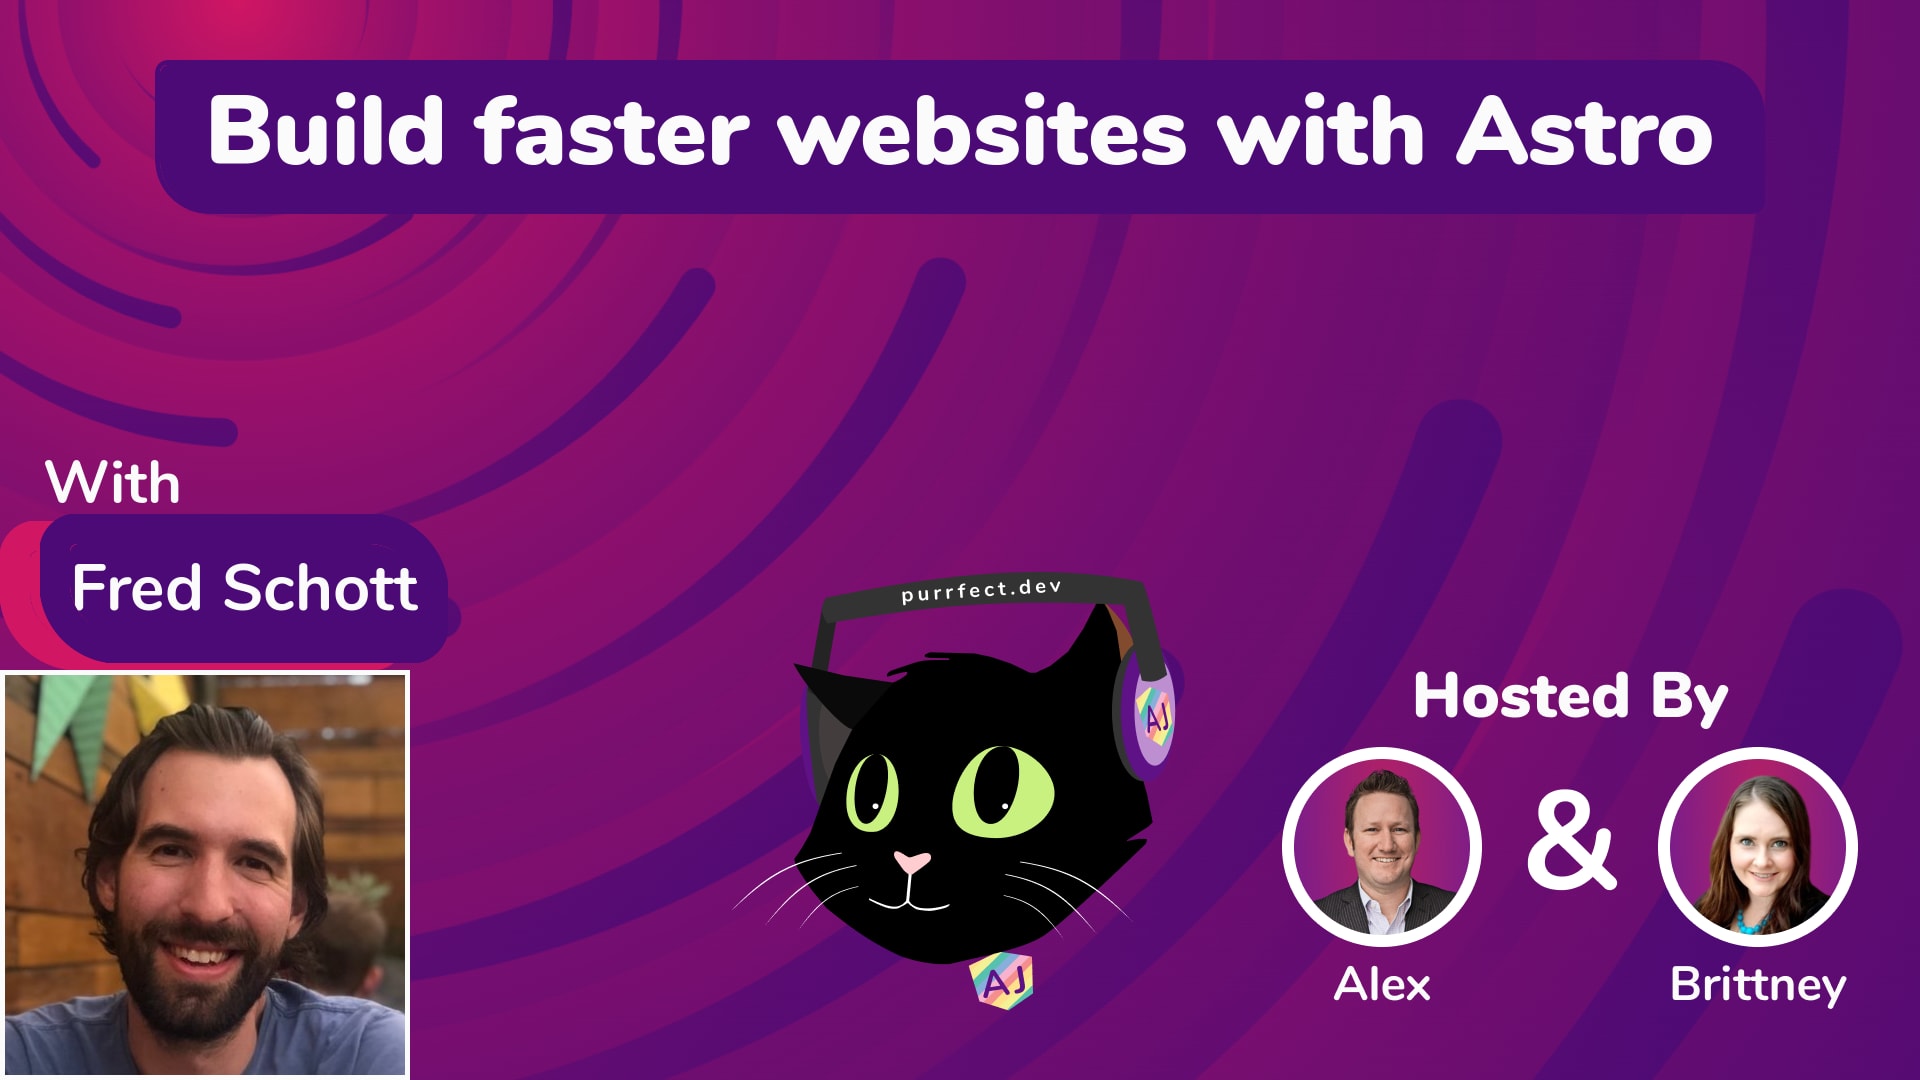 2.11 - Build faster websites with Astro